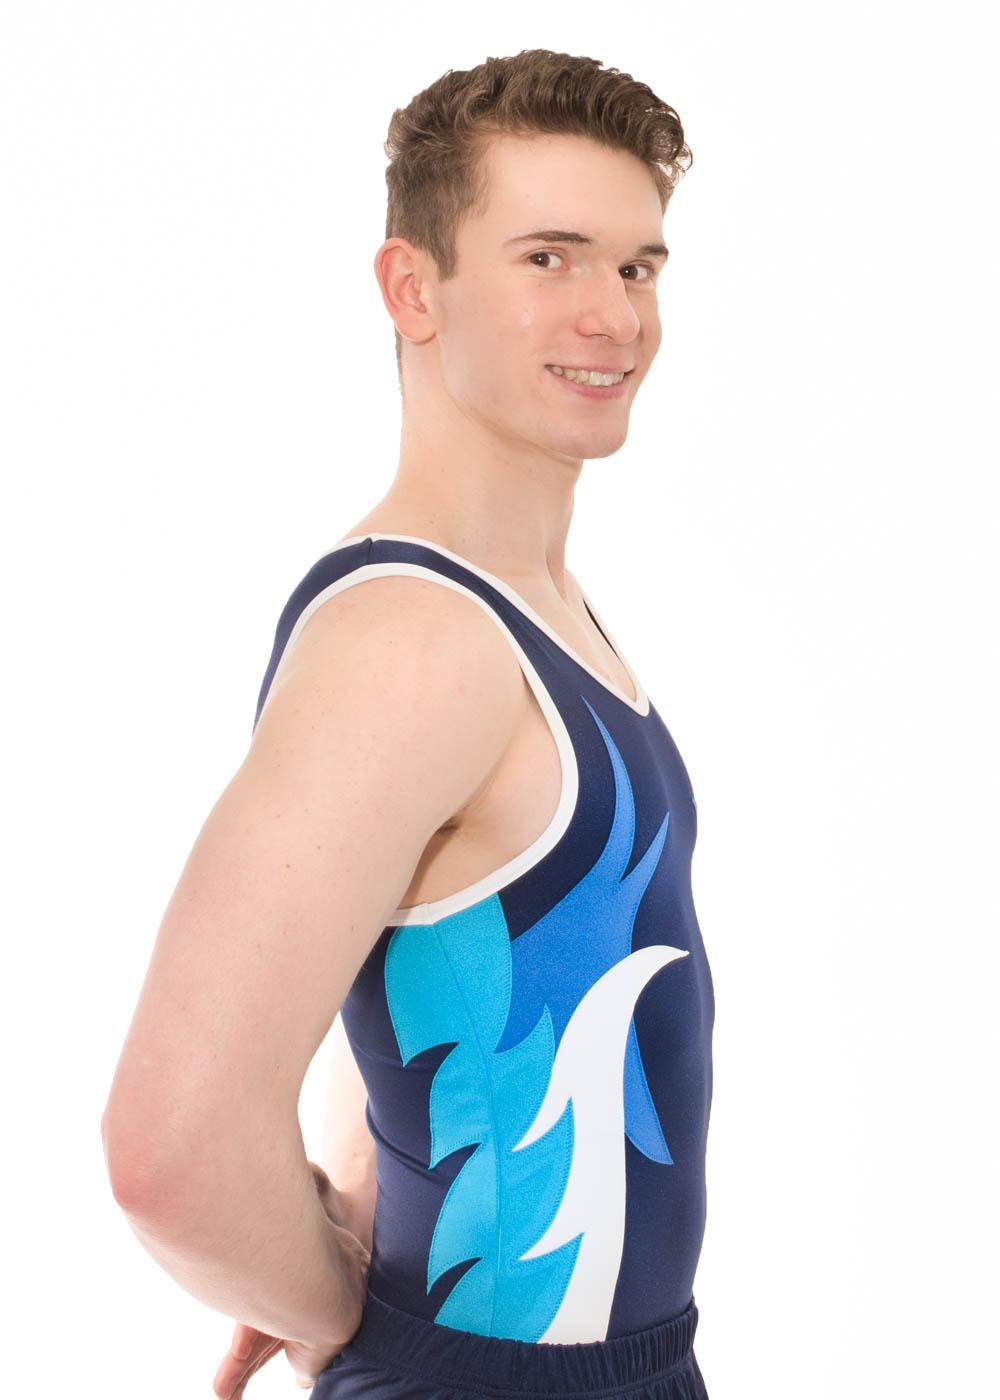 WREN -BV478:- Mens Sleeveless Leotard with Blue and White side details ...